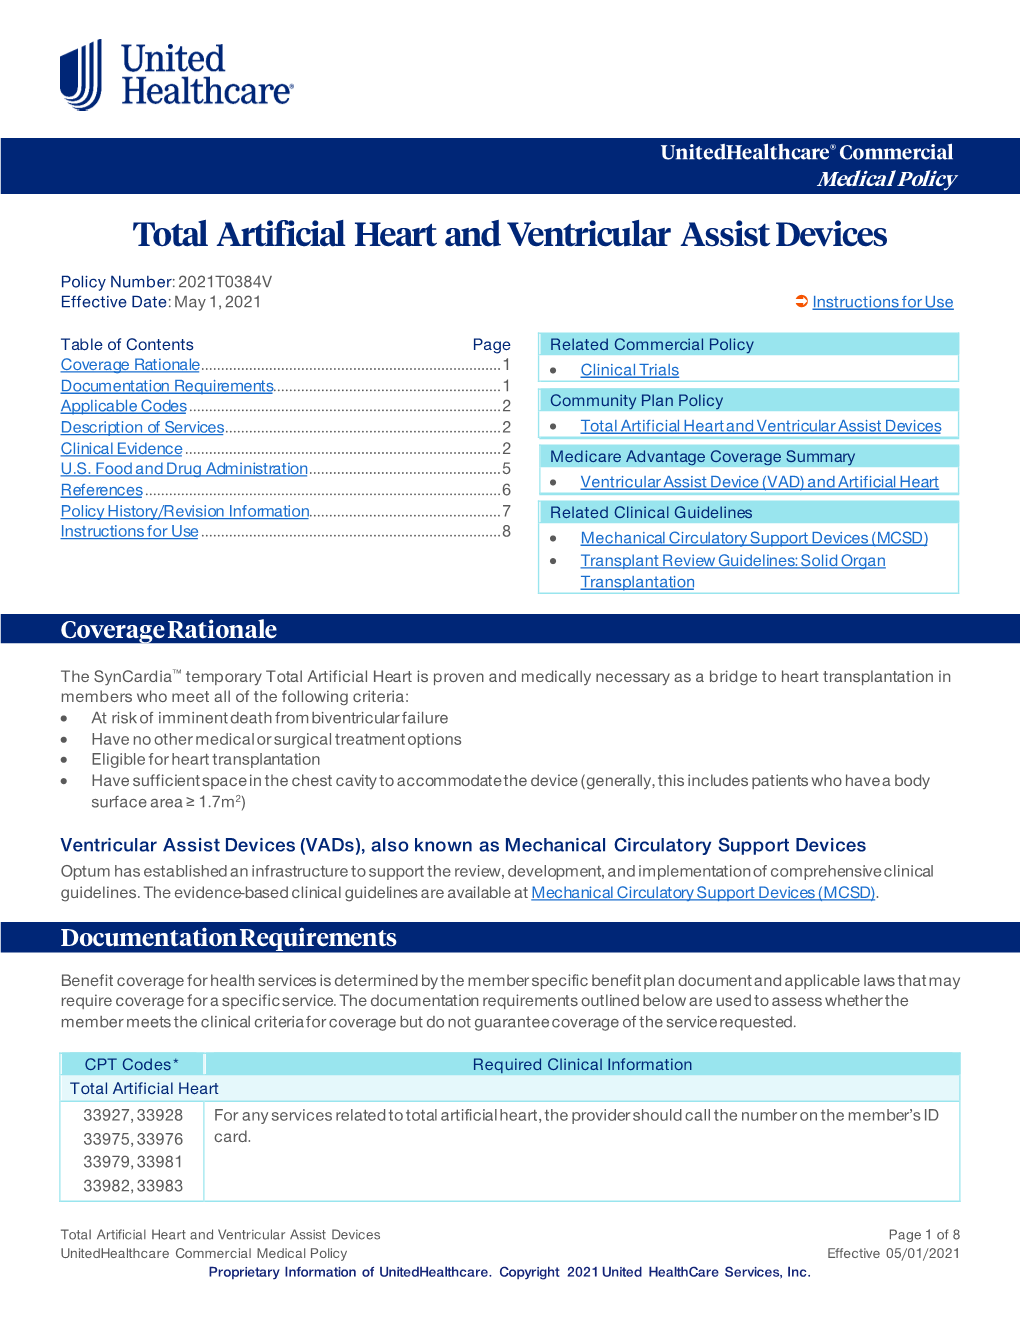 Total Artificial Heart and Ventricular Assist Devices